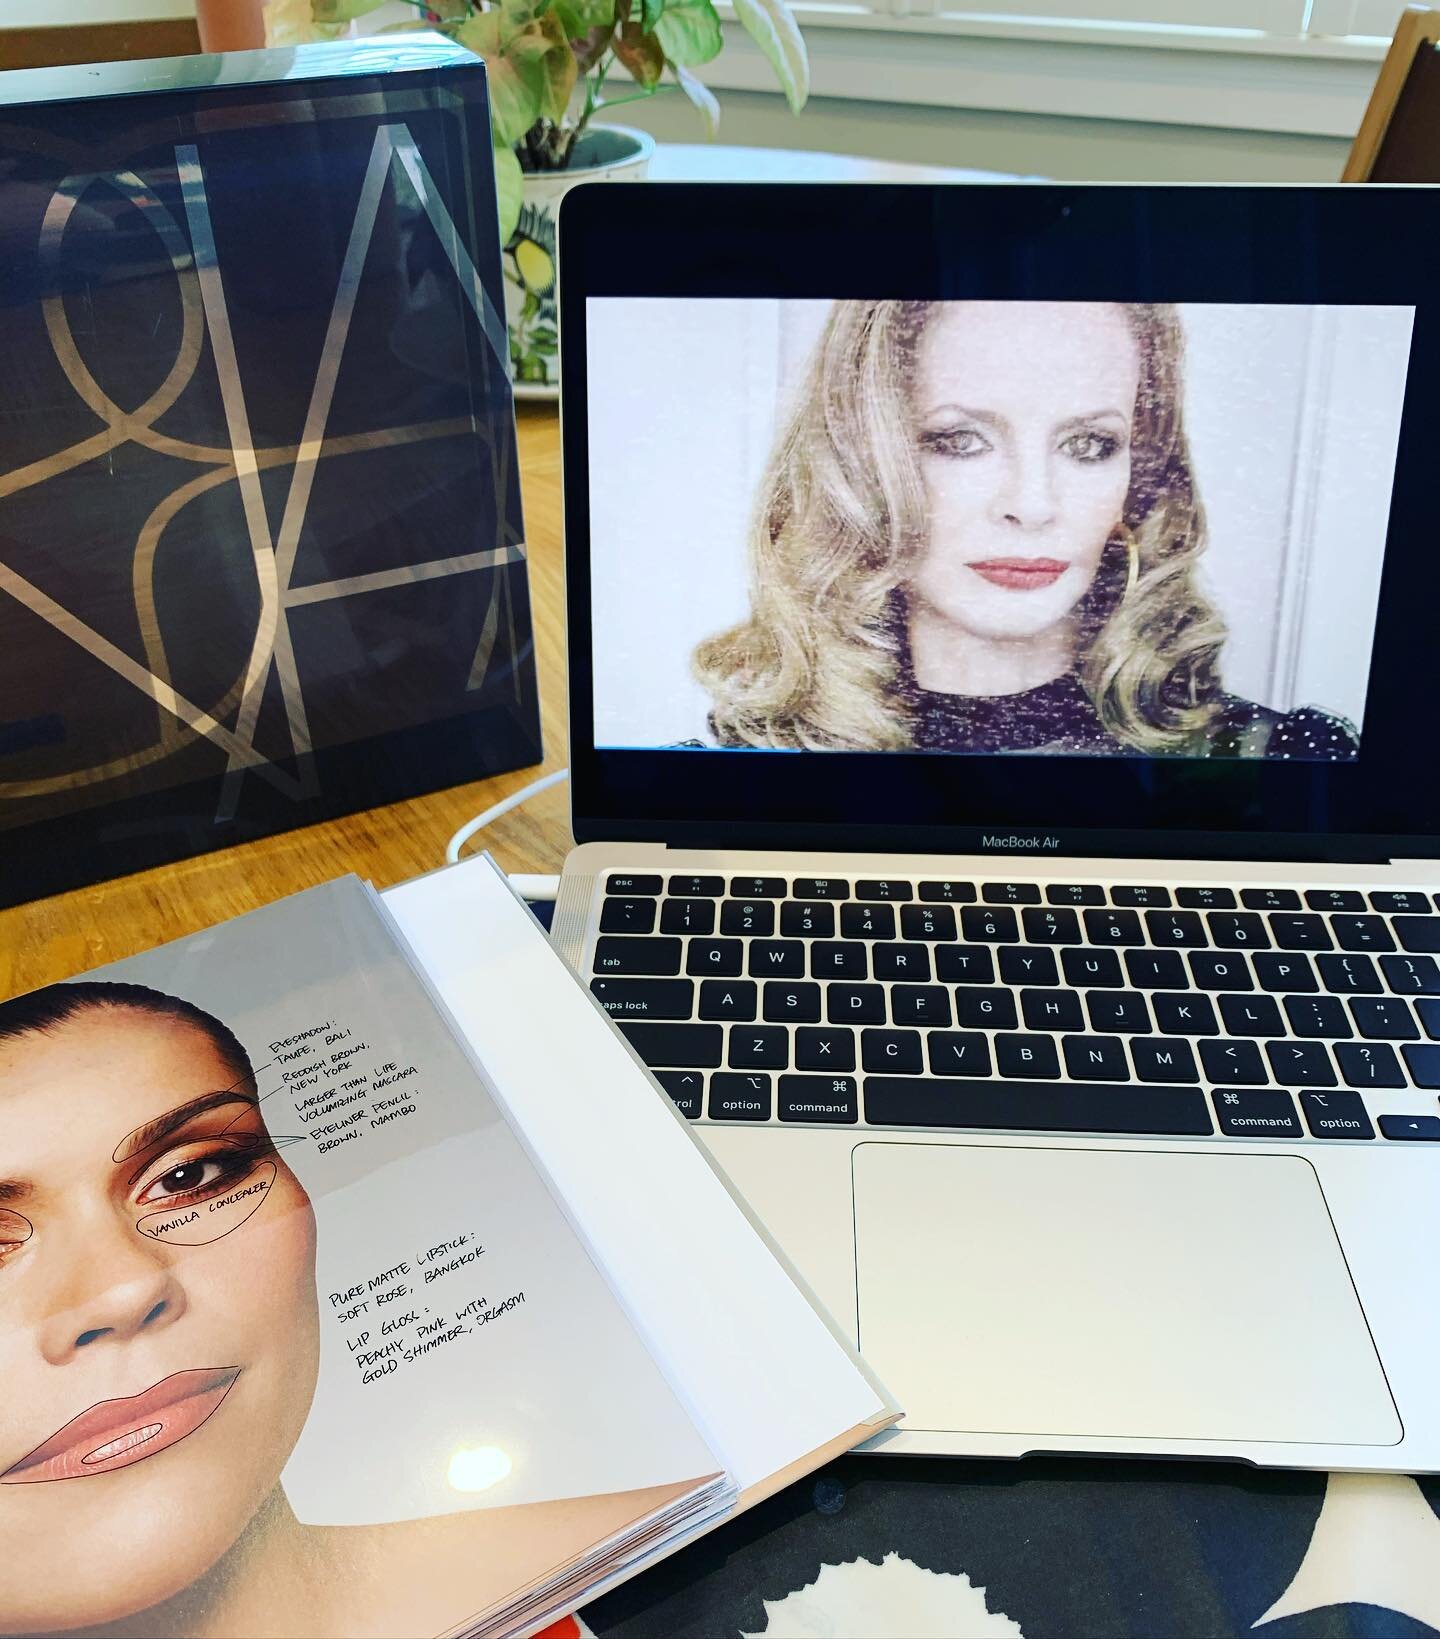 Nars training today ❤️ and I just remembered that I own this amazing book bought in London years ago &lsquo;Makeup Your Mind: Express Yourself&rsquo; by Francois Nars ❤️ #learnlivemecca